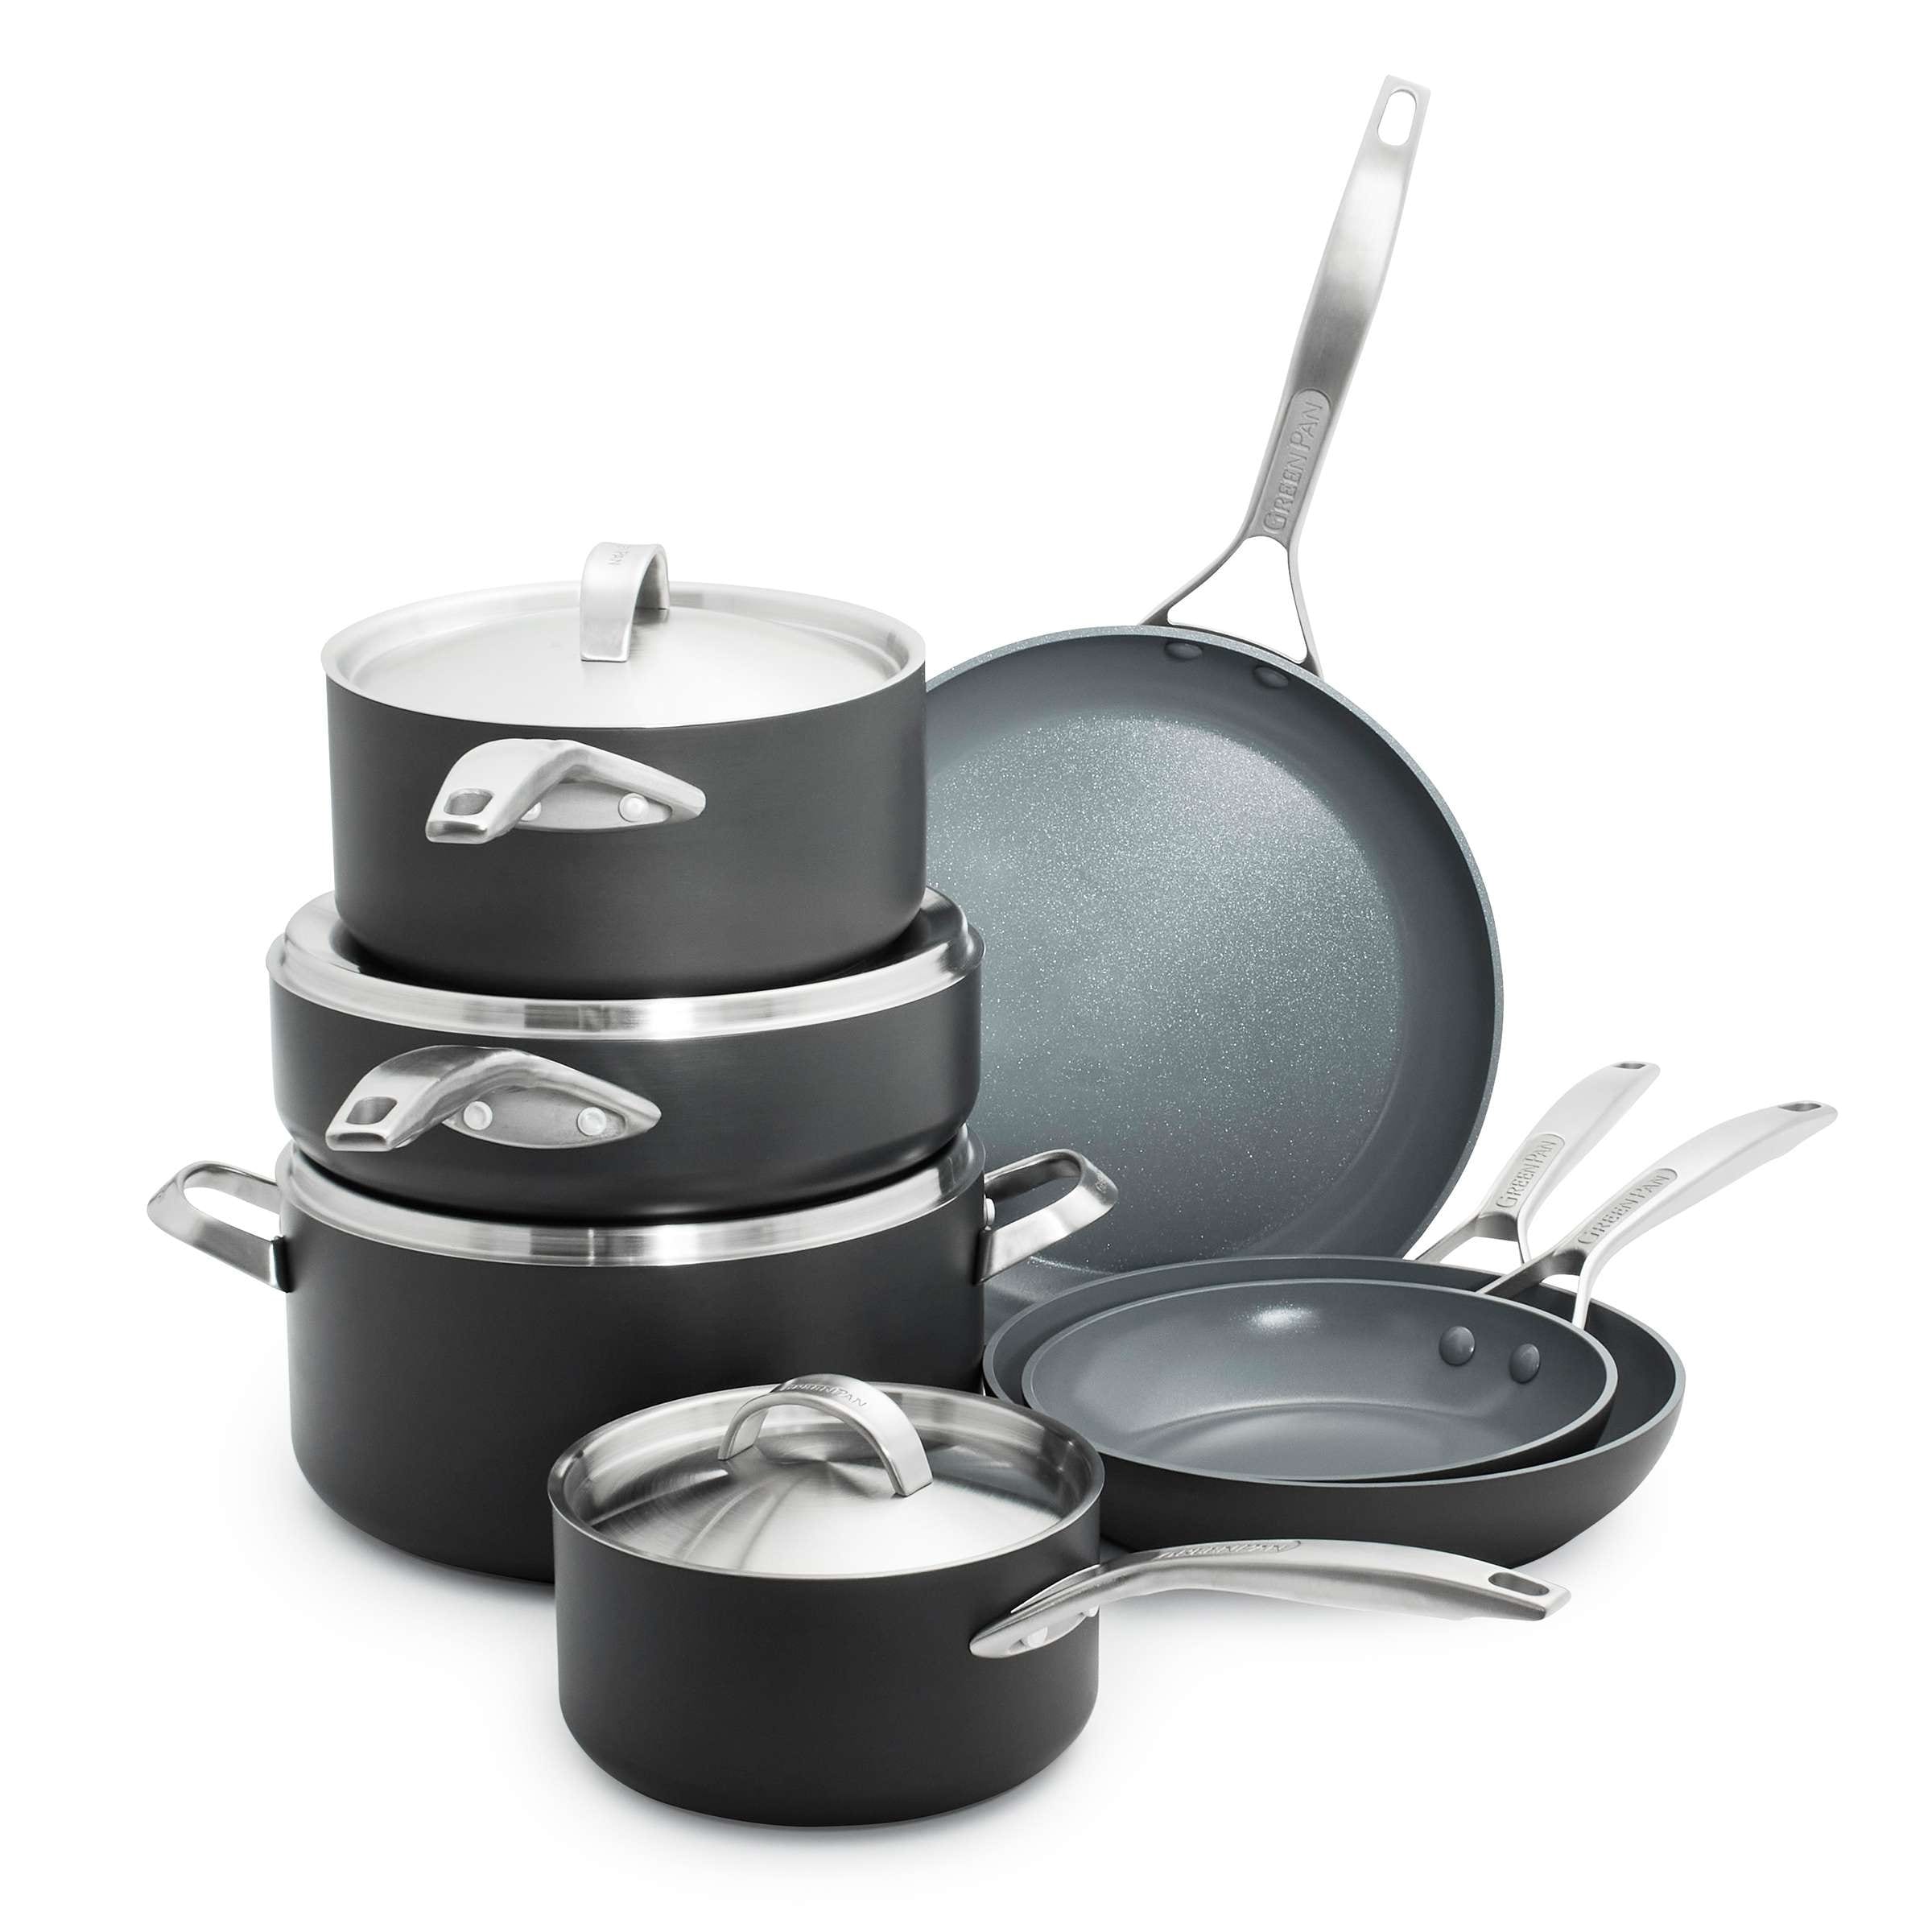 https://ak1.ostkcdn.com/images/products/is/images/direct/1e8162d9ca4d9e194e8888436d533687a8ca6716/Paris-Pro-11-piece-Non-stick-Ceramic-Cookware-Set.jpg